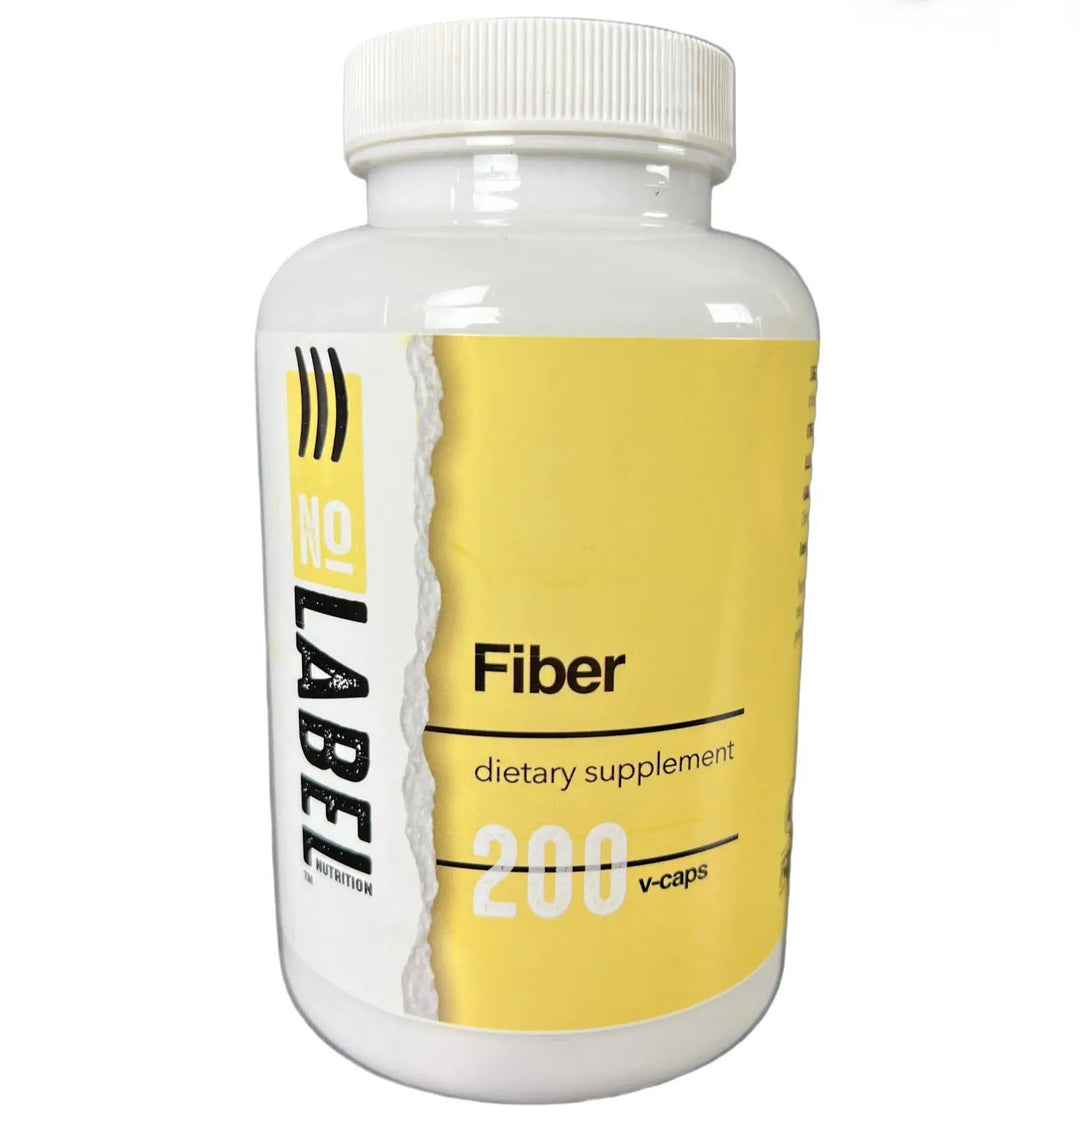 A bottle of No Label Nutrition Fiber Supplement on a white background